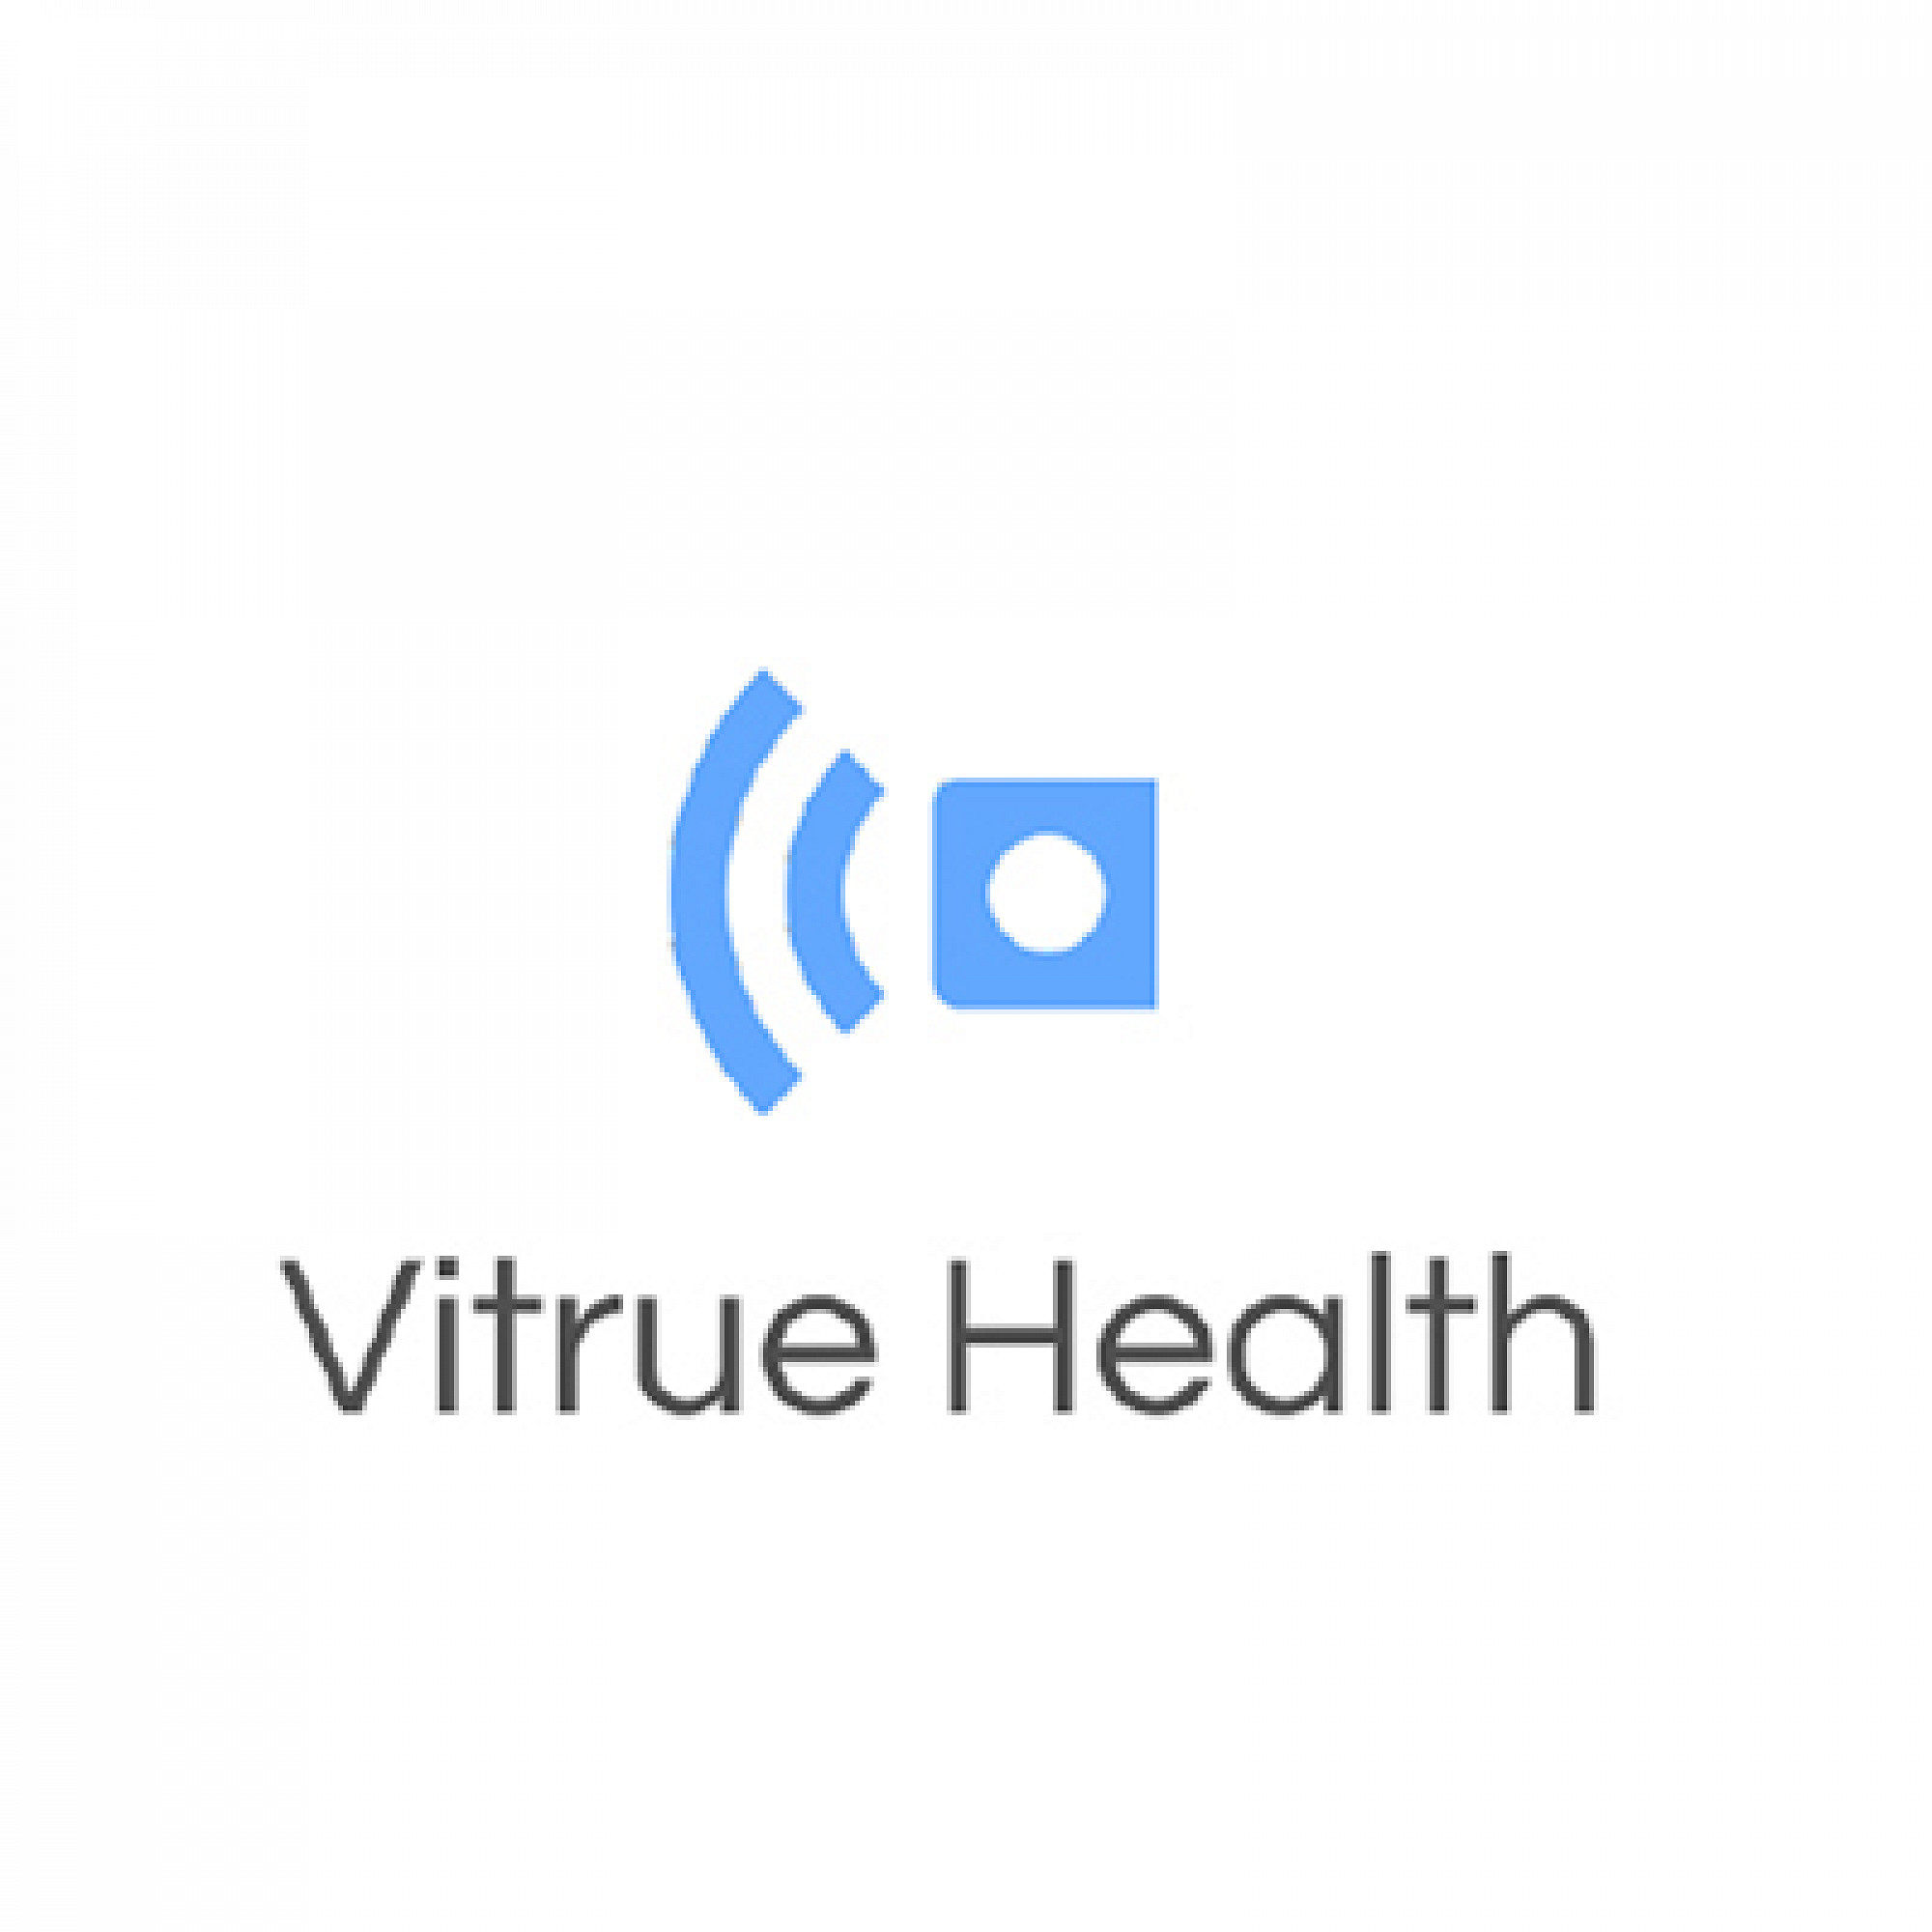 Vitrue Health, Provider of AI-Powered Musculoskeletal Health Assessments, Completes £1.5m Funding Round.